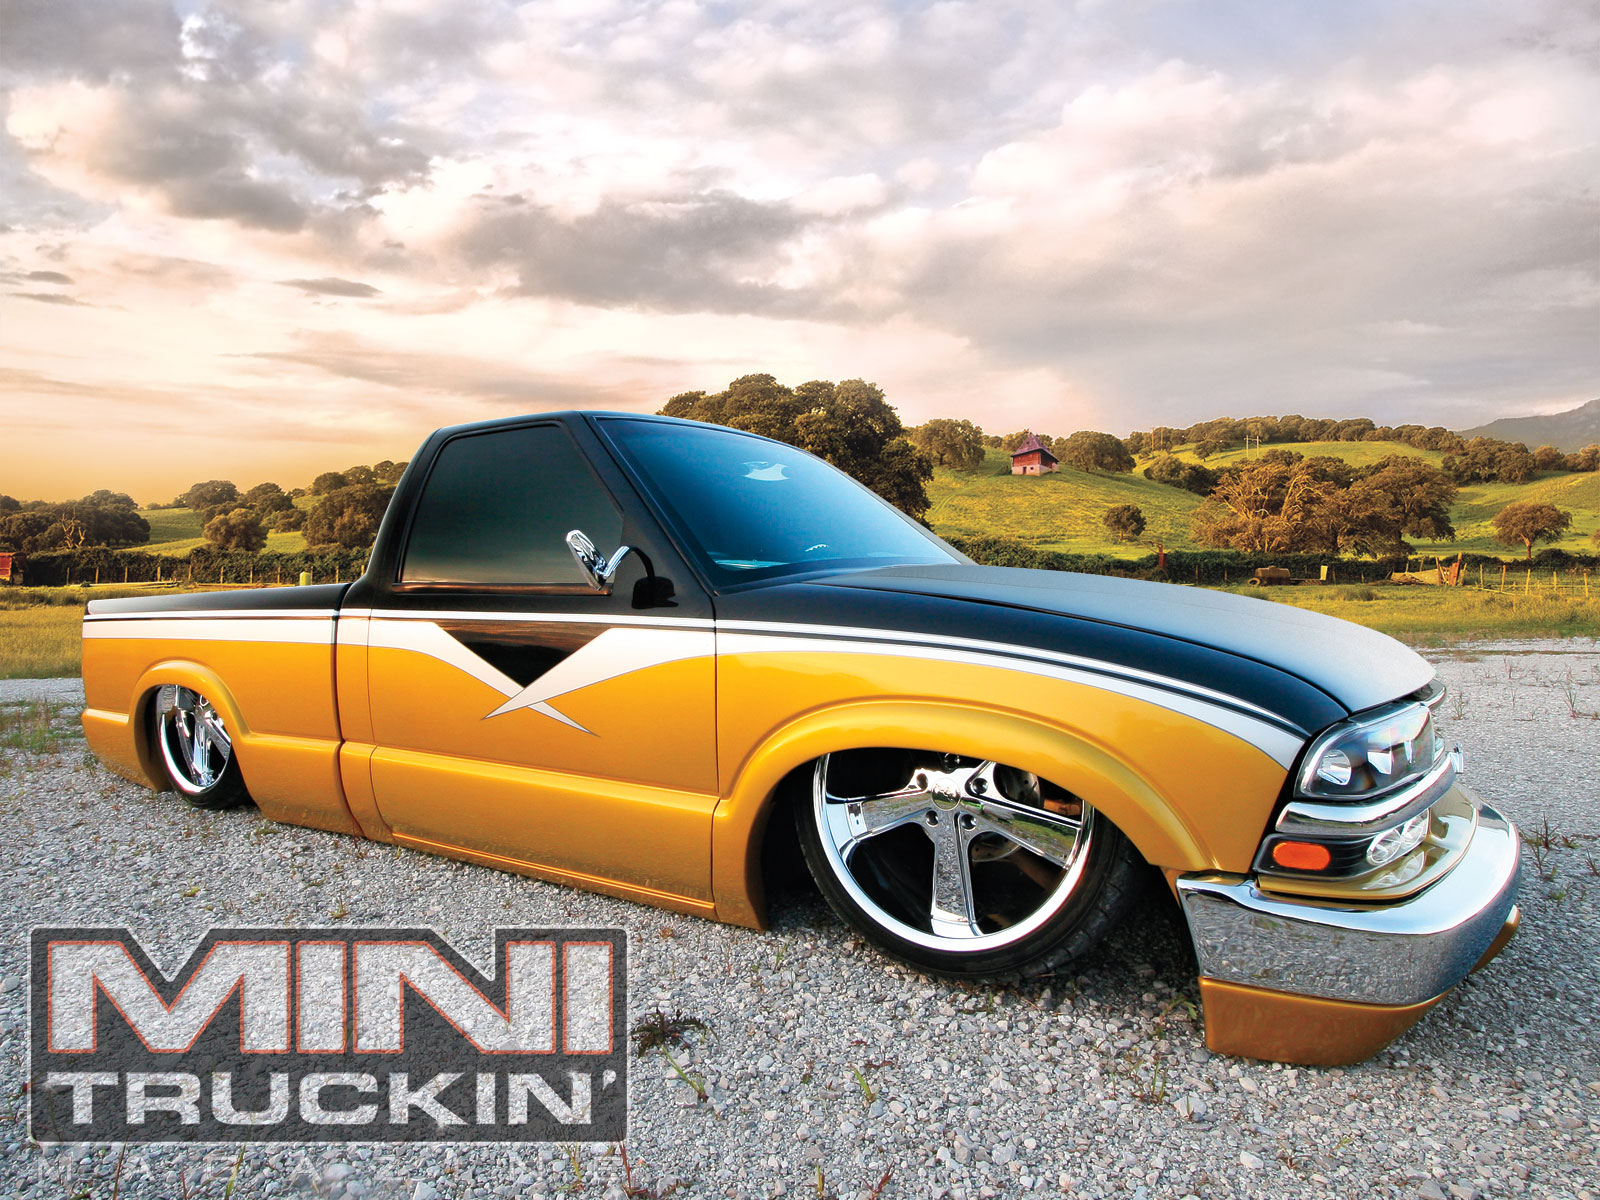 Mini Truckin Wallpaper December Chevy S10 Front Angle